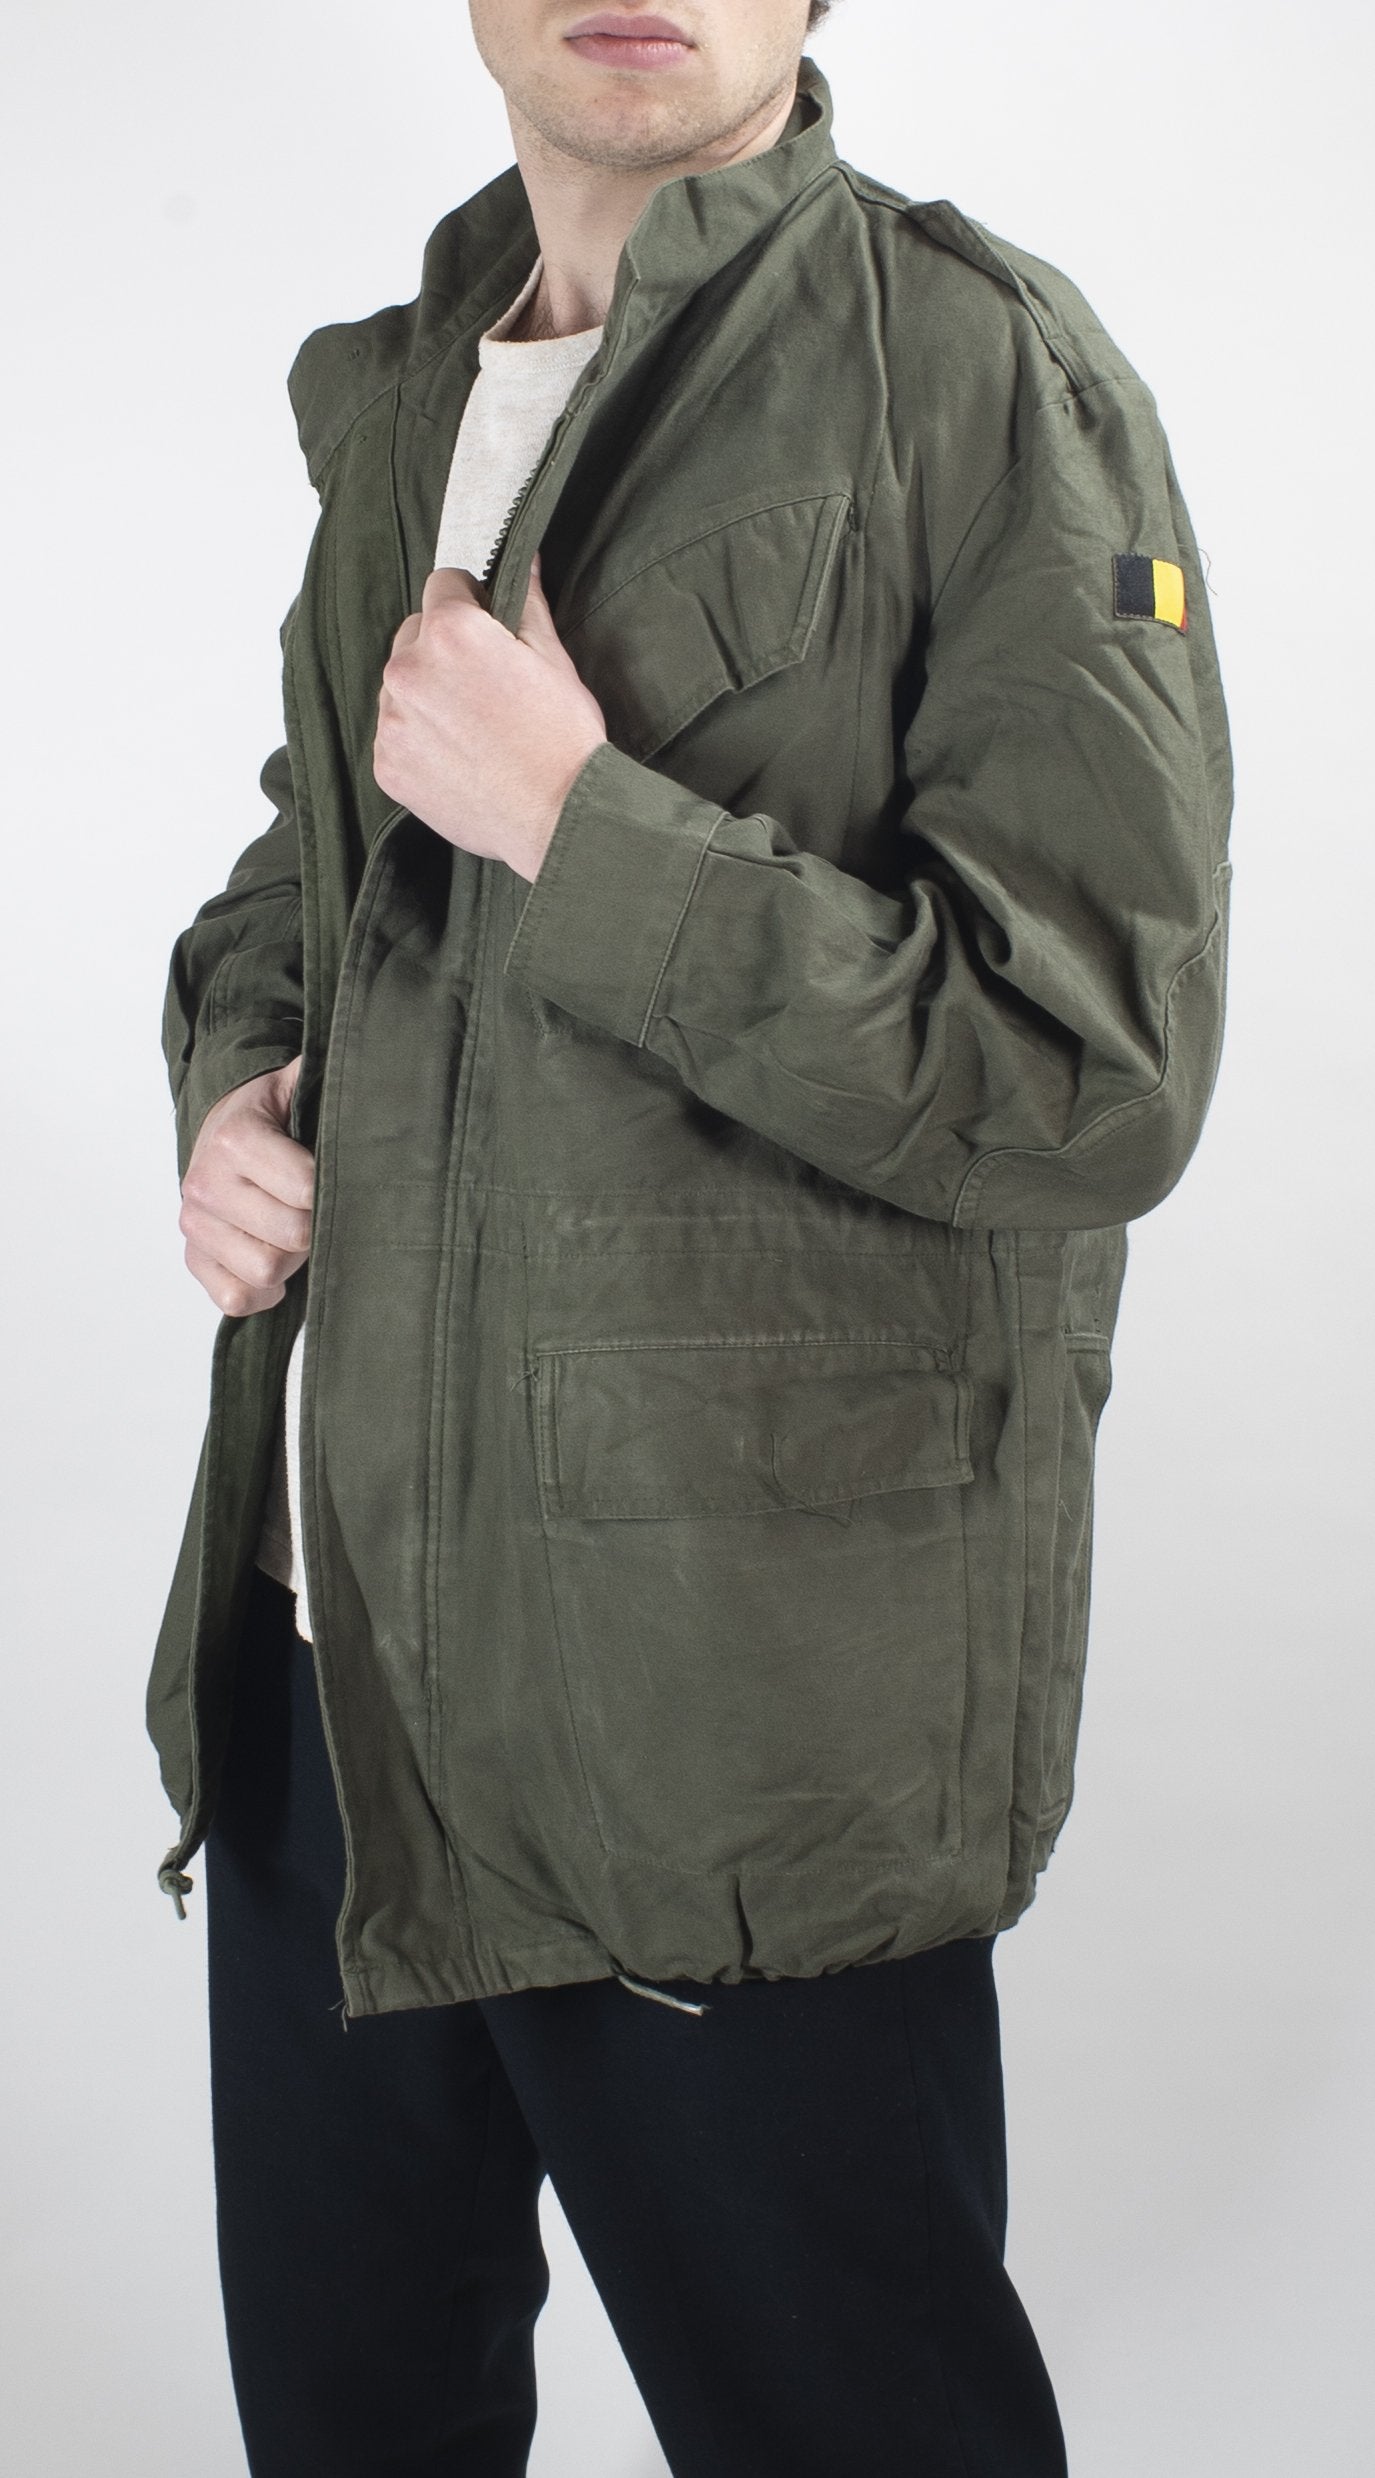 Genuine Army Surplus Jackets And Coats Page 2 - Forces Uniform and Kit